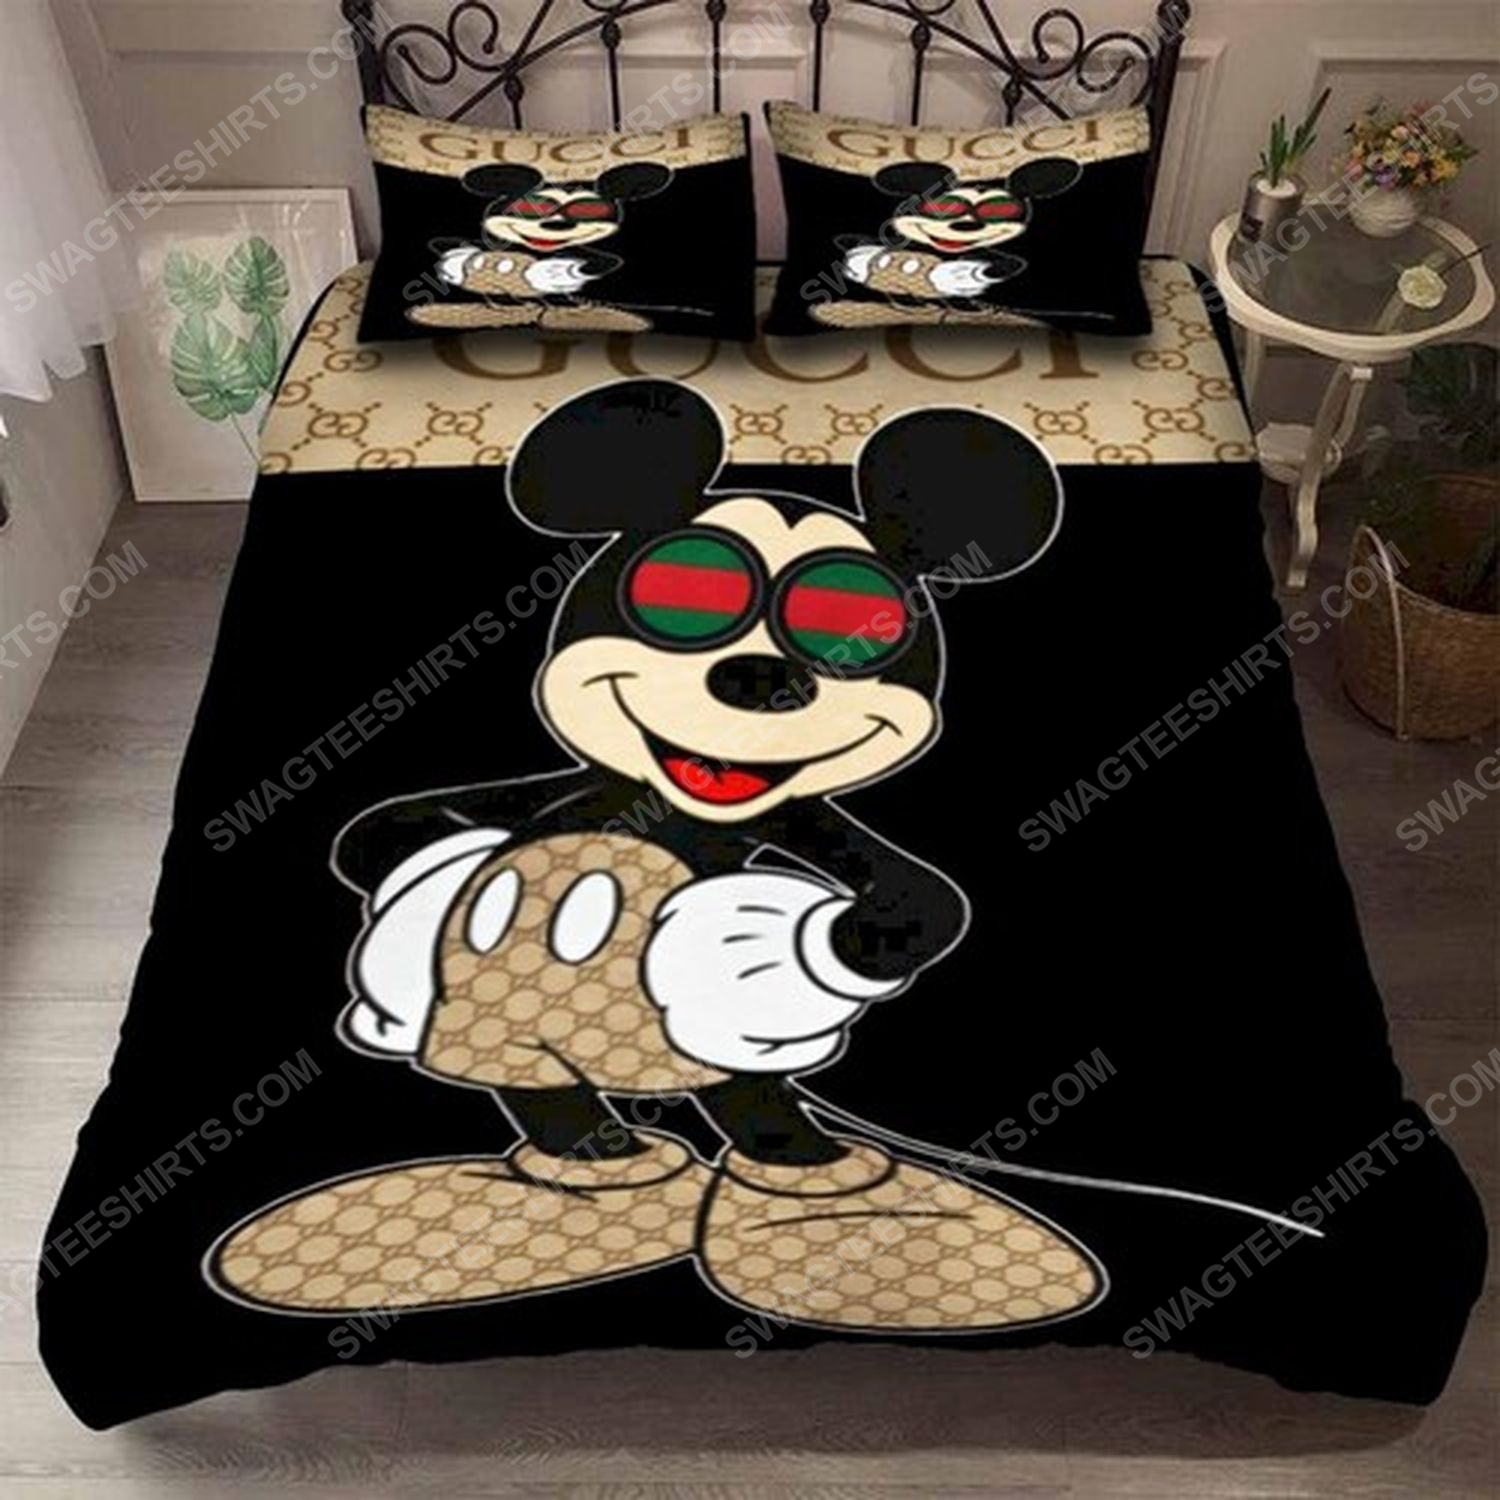 Gucci and mickey mouse full print duvet cover bedding set 1